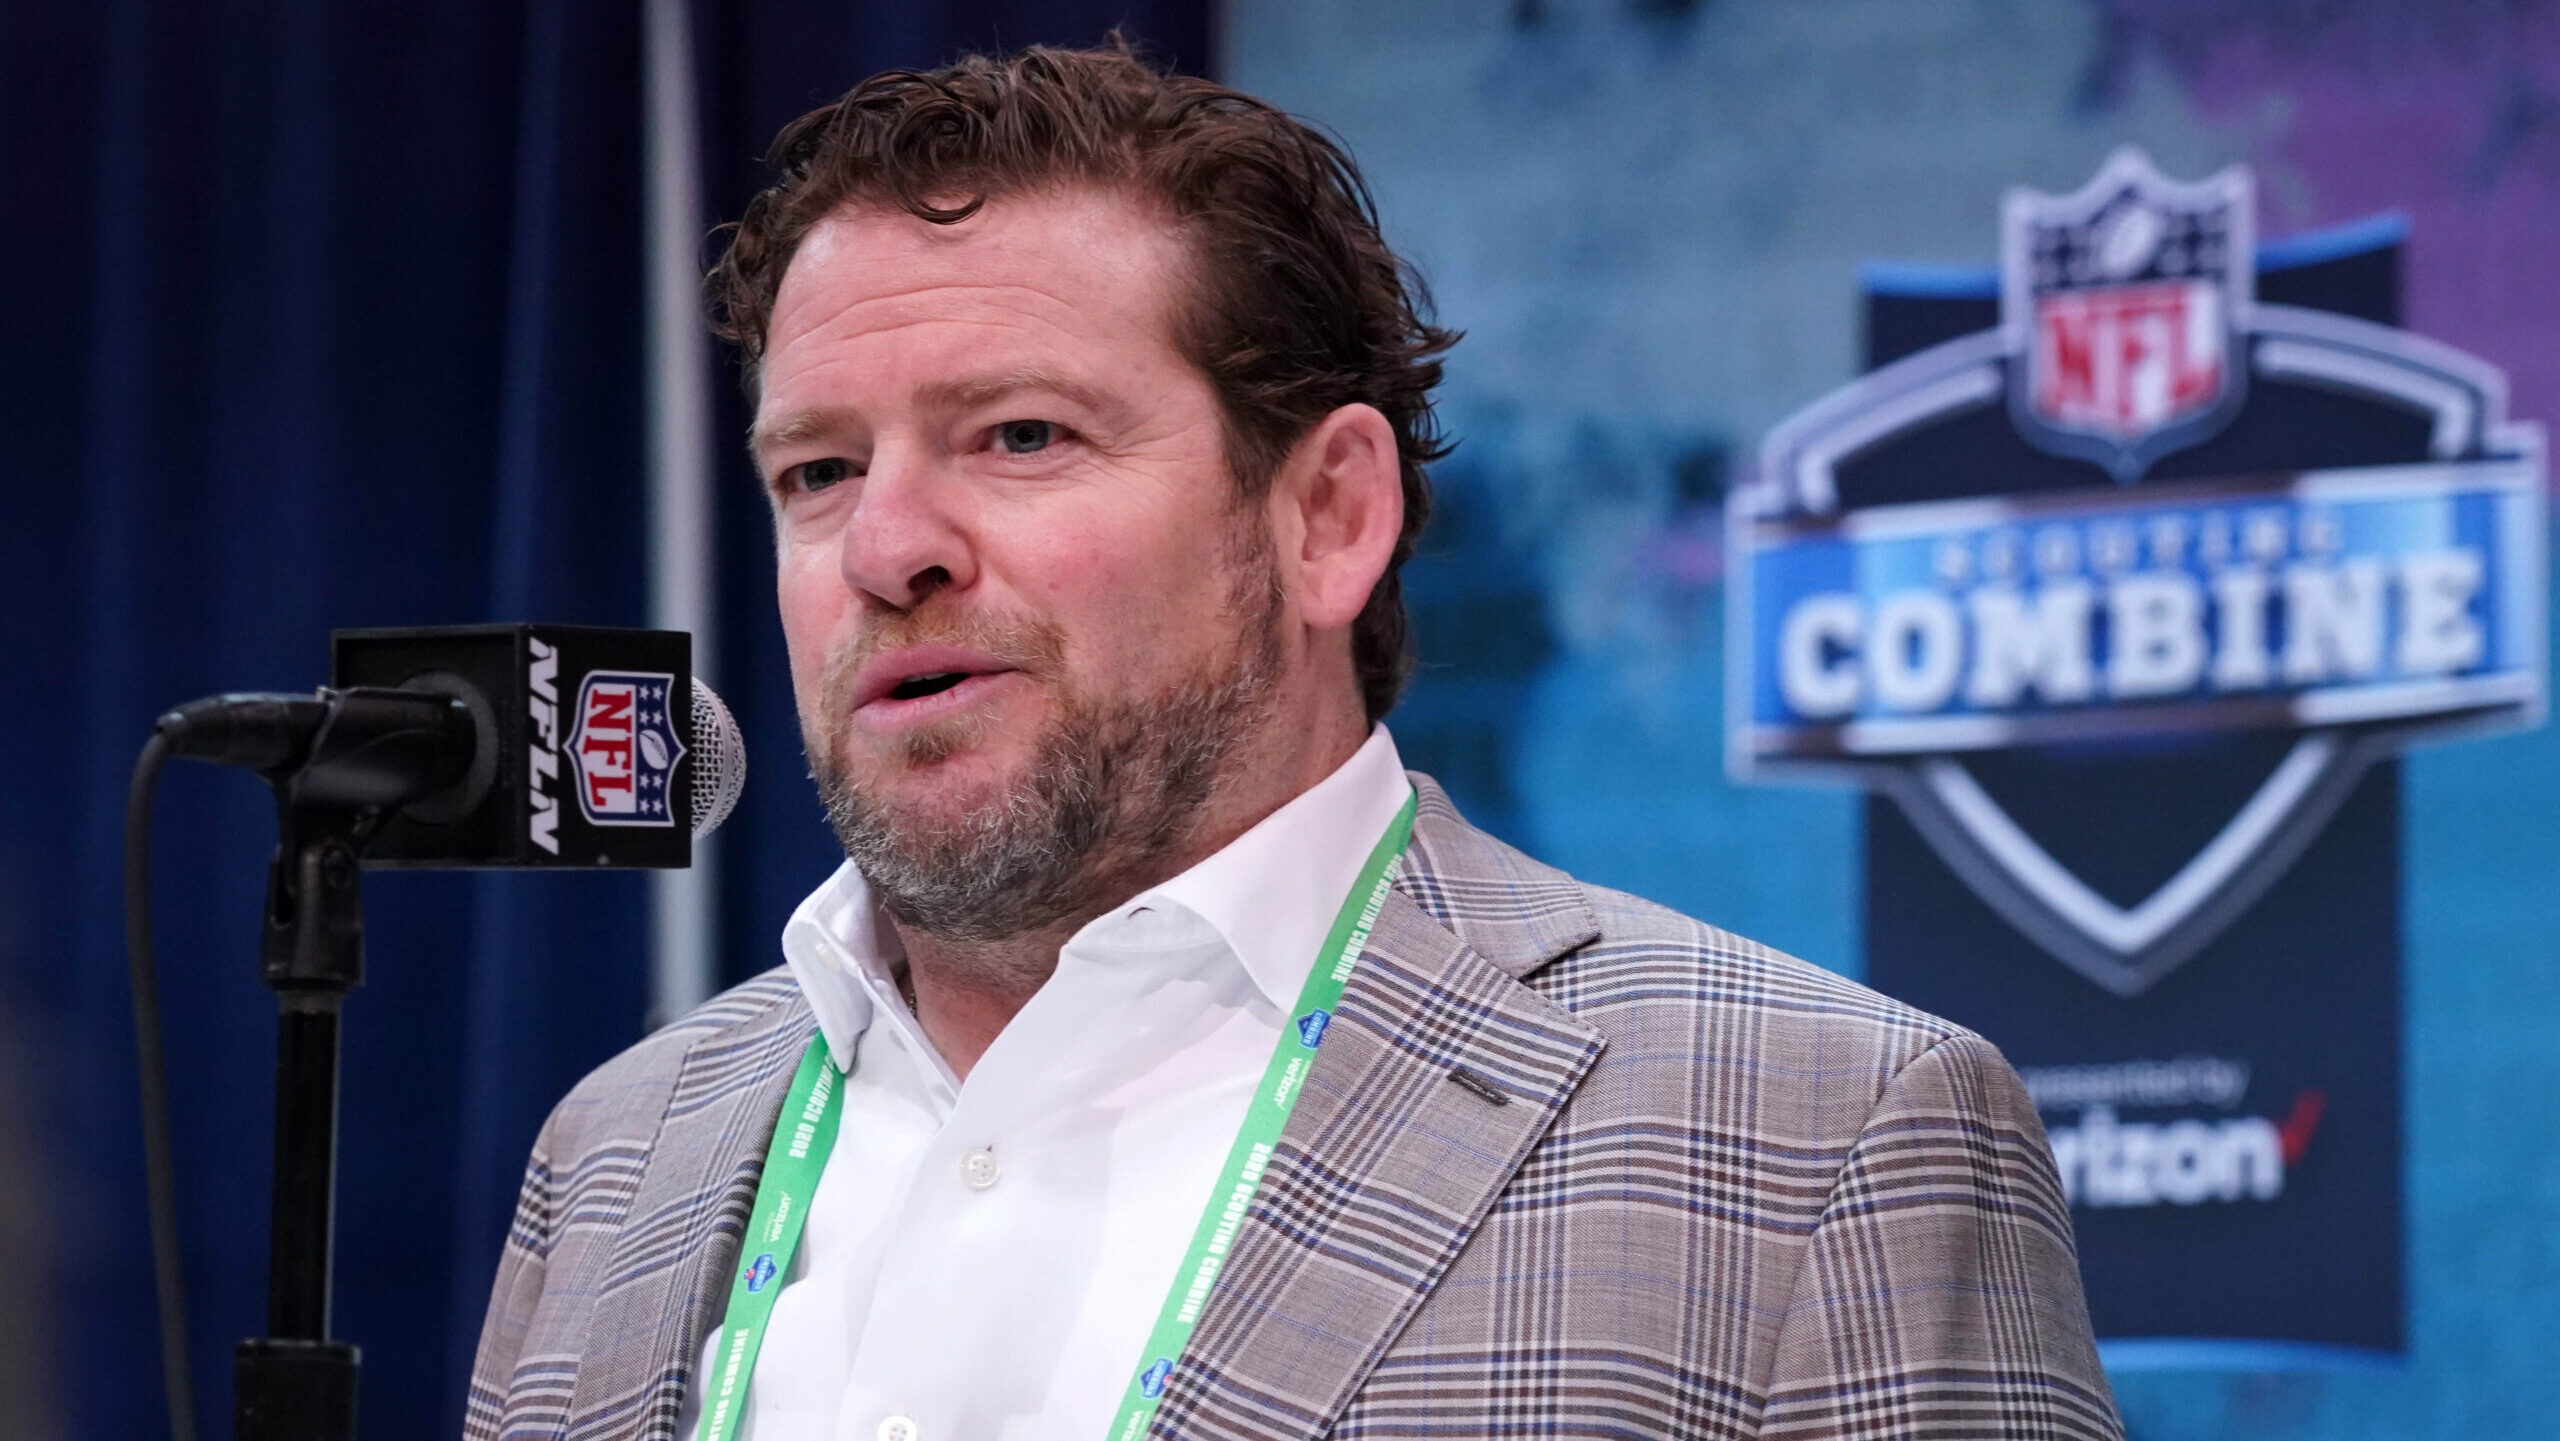 John Schneider stands at the podium at the NFL Combine